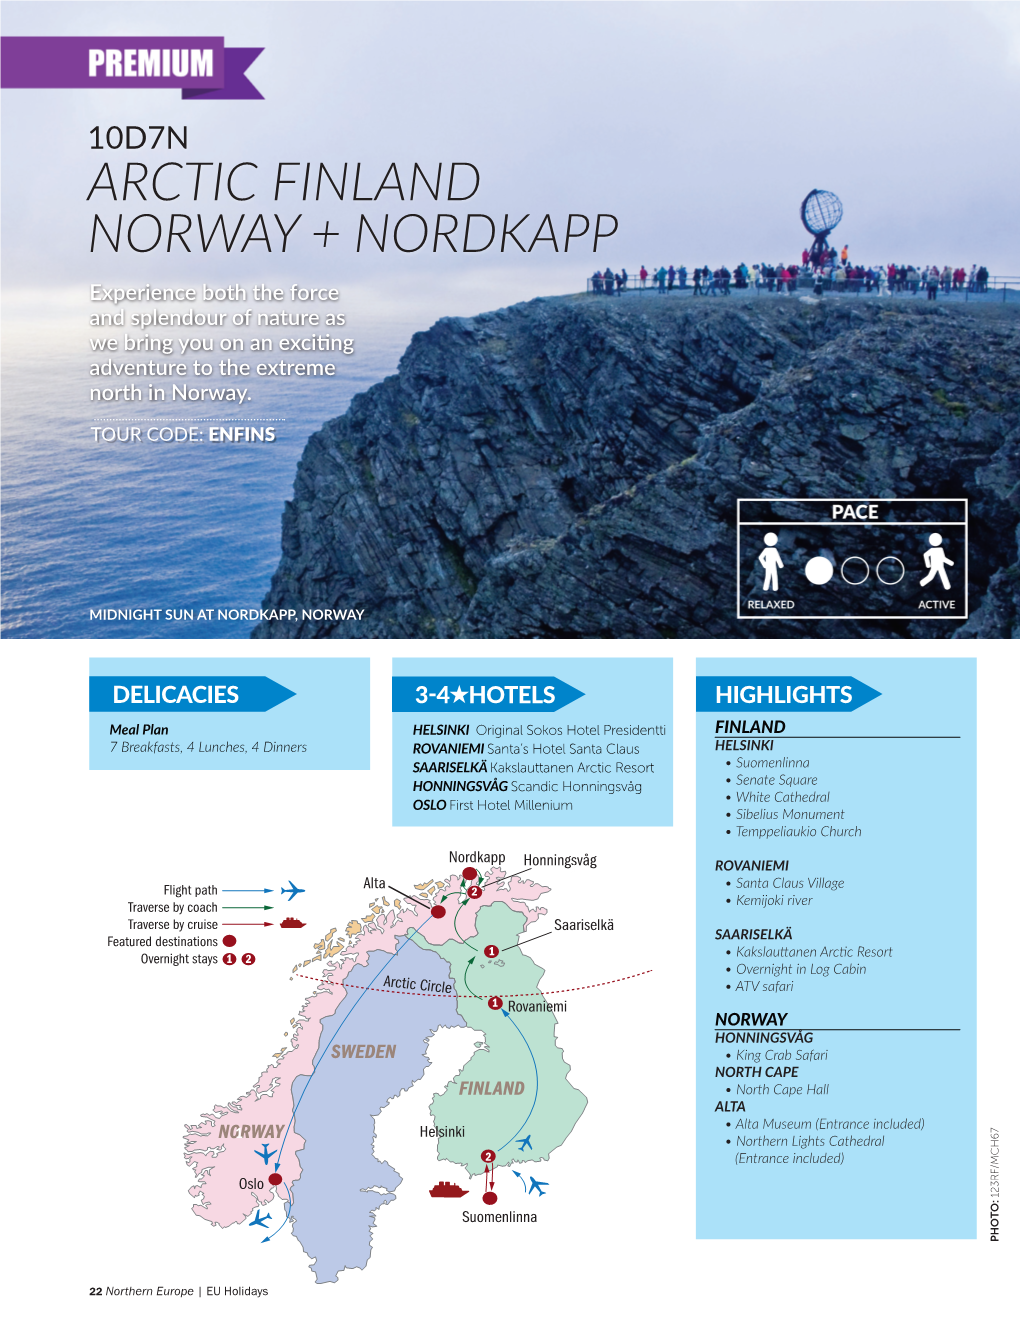 ARCTIC FINLAND NORWAY + NORDKAPP Experience Both the Force and Splendour of Nature As We Bring You on an Exciting Adventure to the Extreme North in Norway